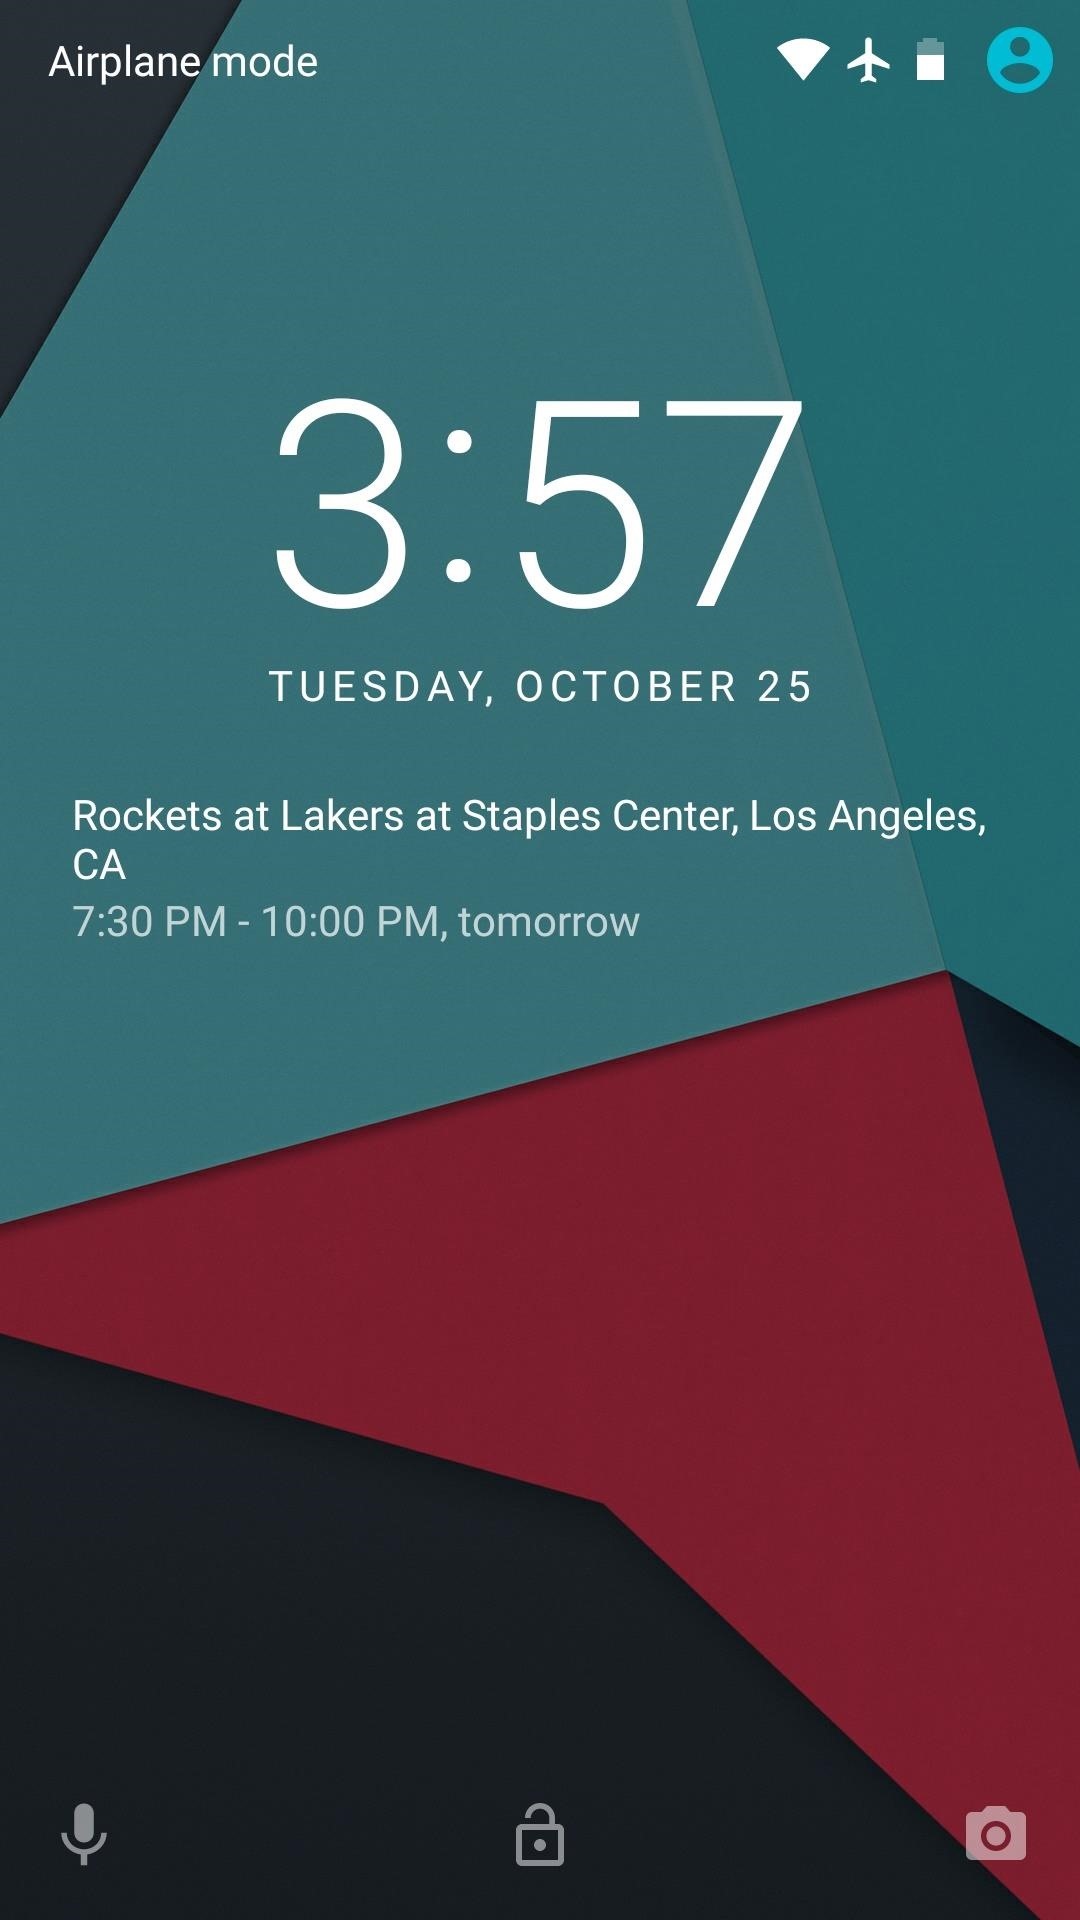 How to Get the iPhone's Calendar View on Your Android Lock Screen